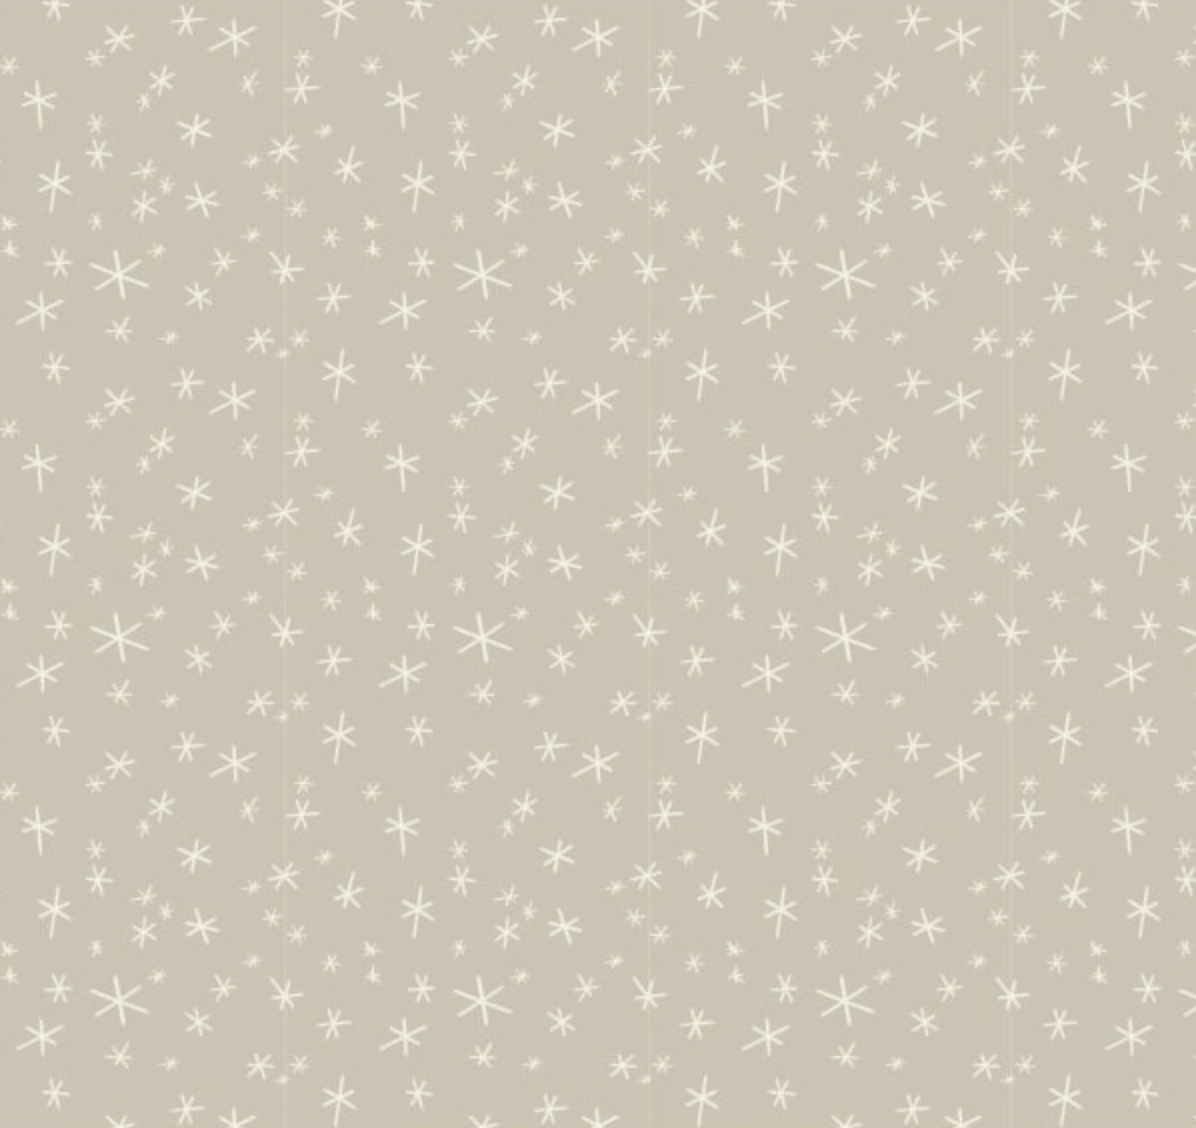 Scattered Stars in Light Taupe - Weave & Woven